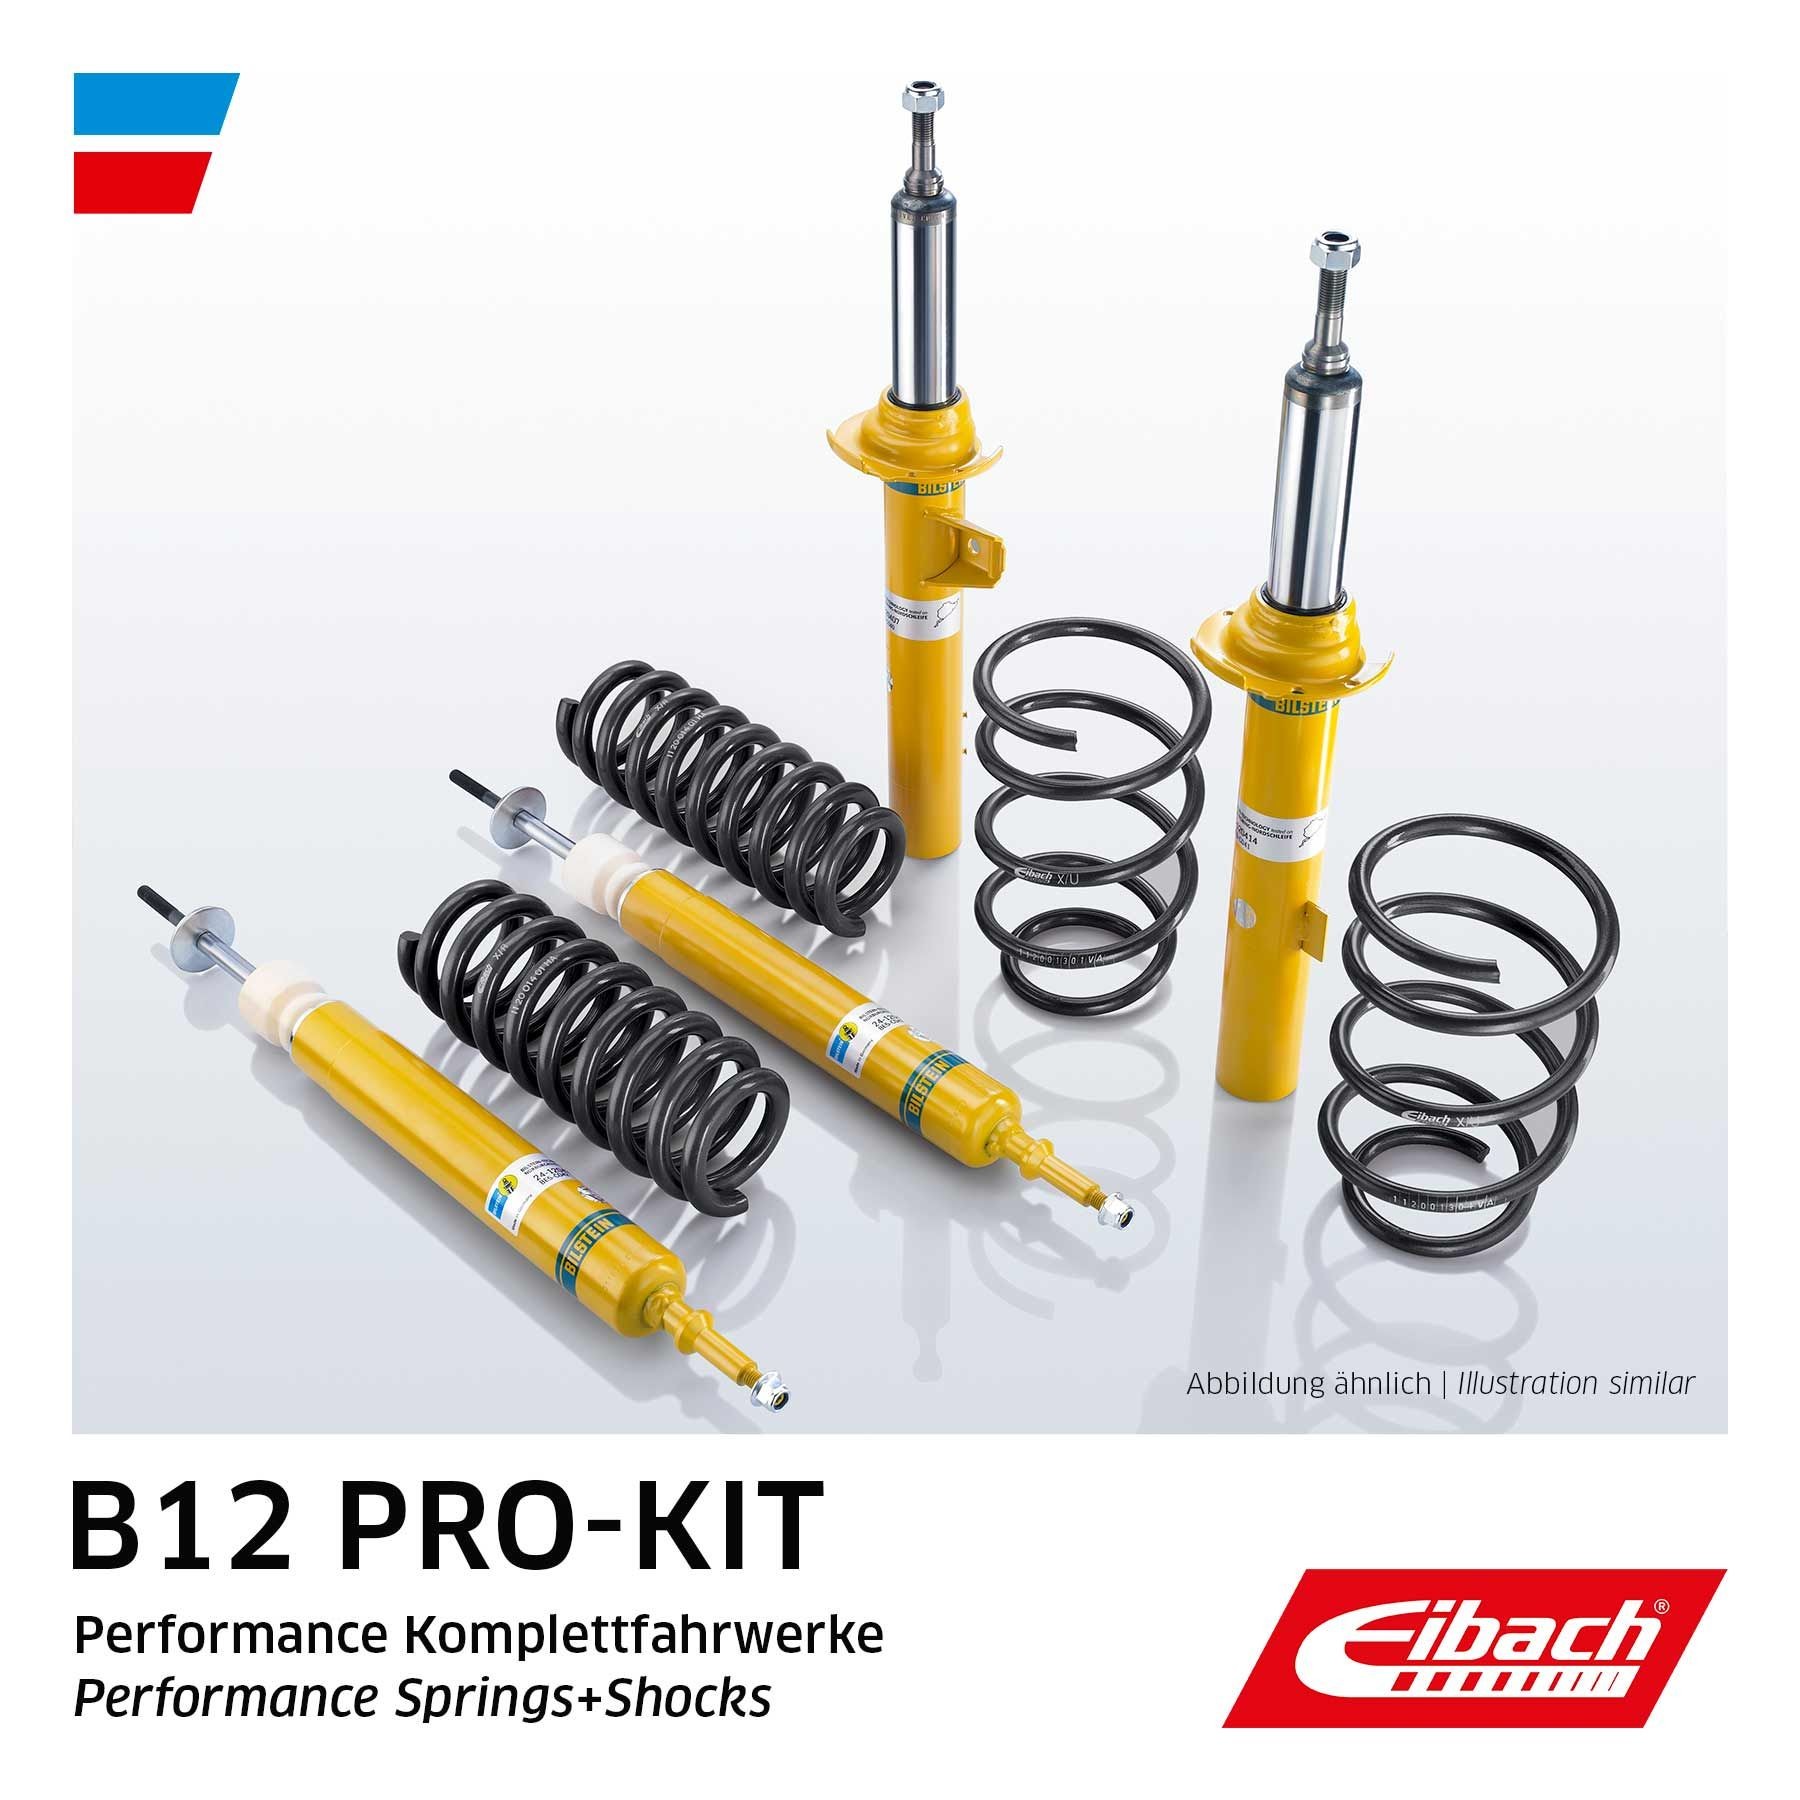 EIBACH E90-25-004-03-22 Suspension kit, coil springs / shock absorbers W210